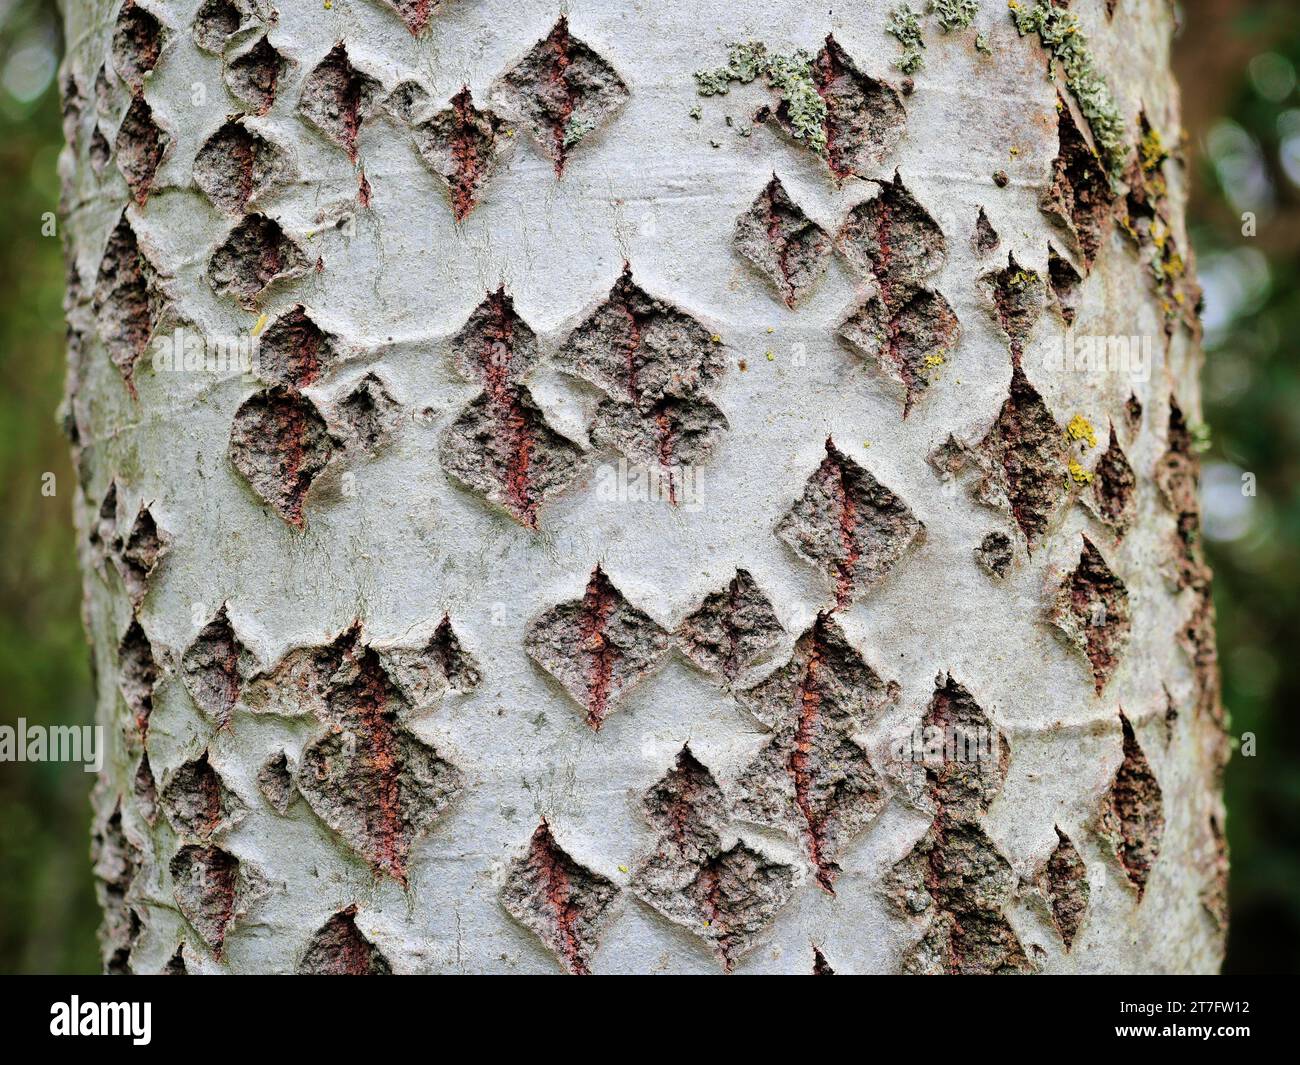 Aspen - The texture of trembling aspen bark is highly decorative and inspiring, providing insects with shelter opportunities. Stock Photo